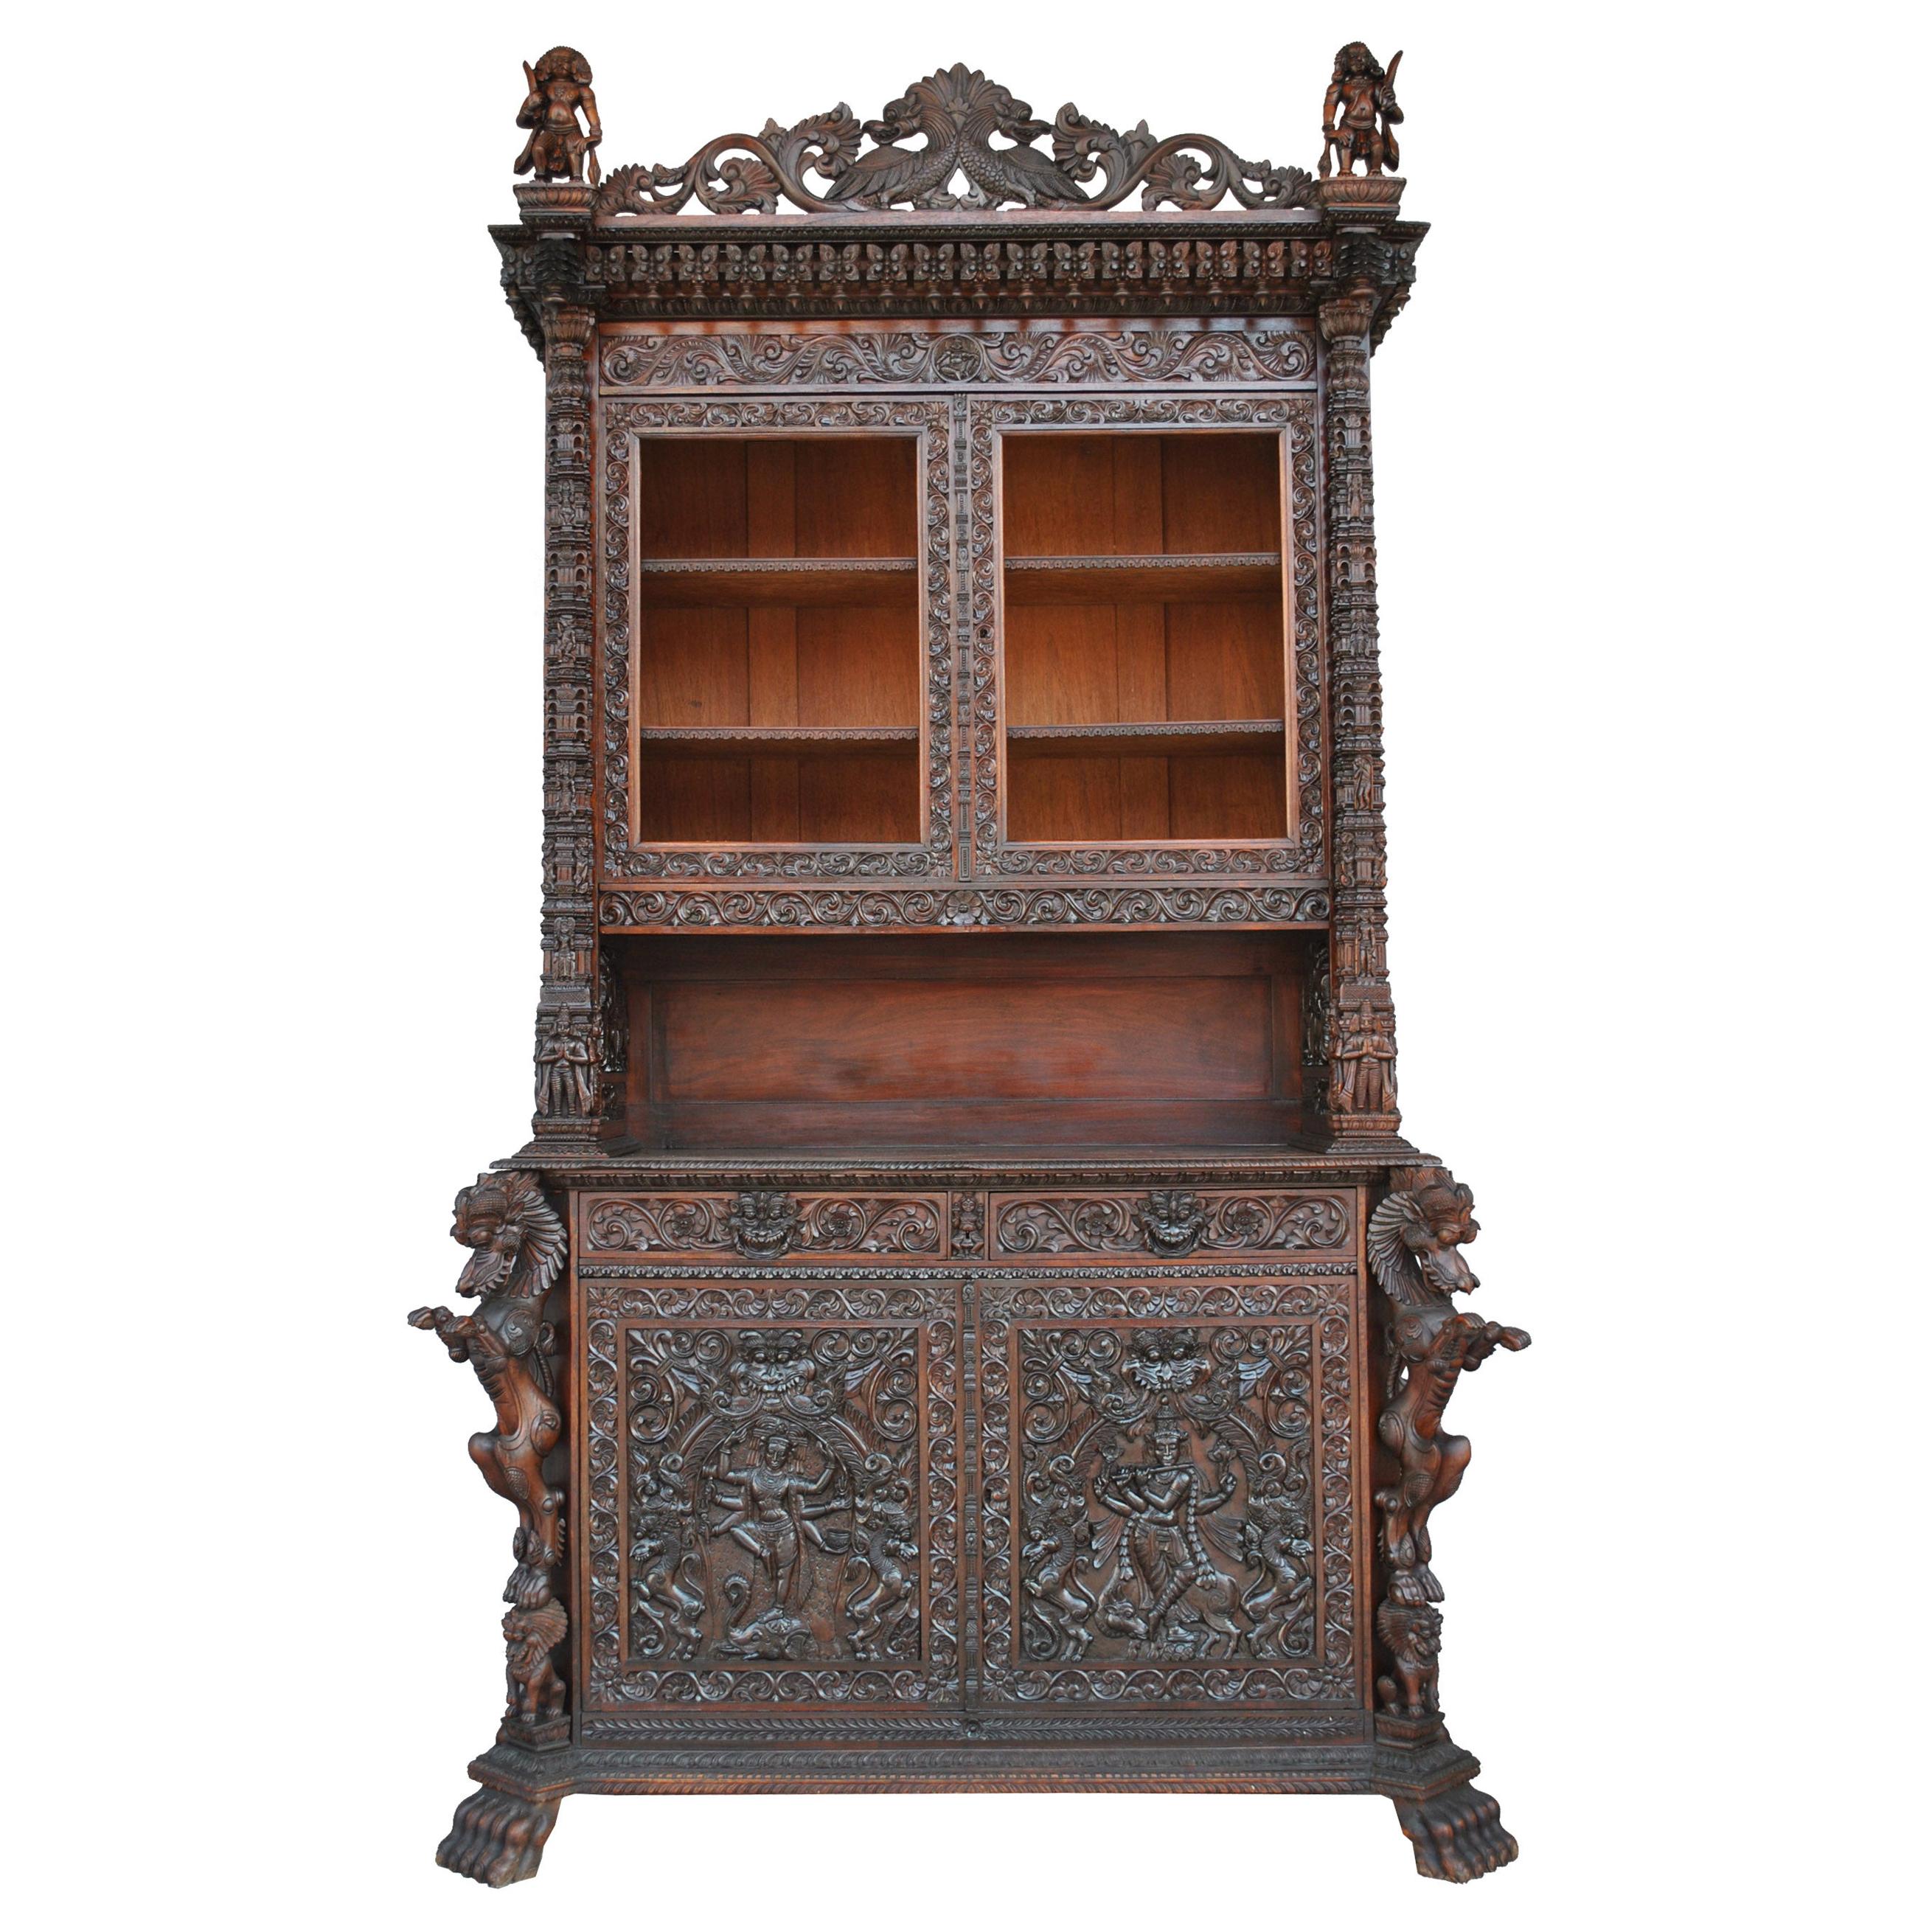 Very Richly Carved 19th Century Indian Cupboard